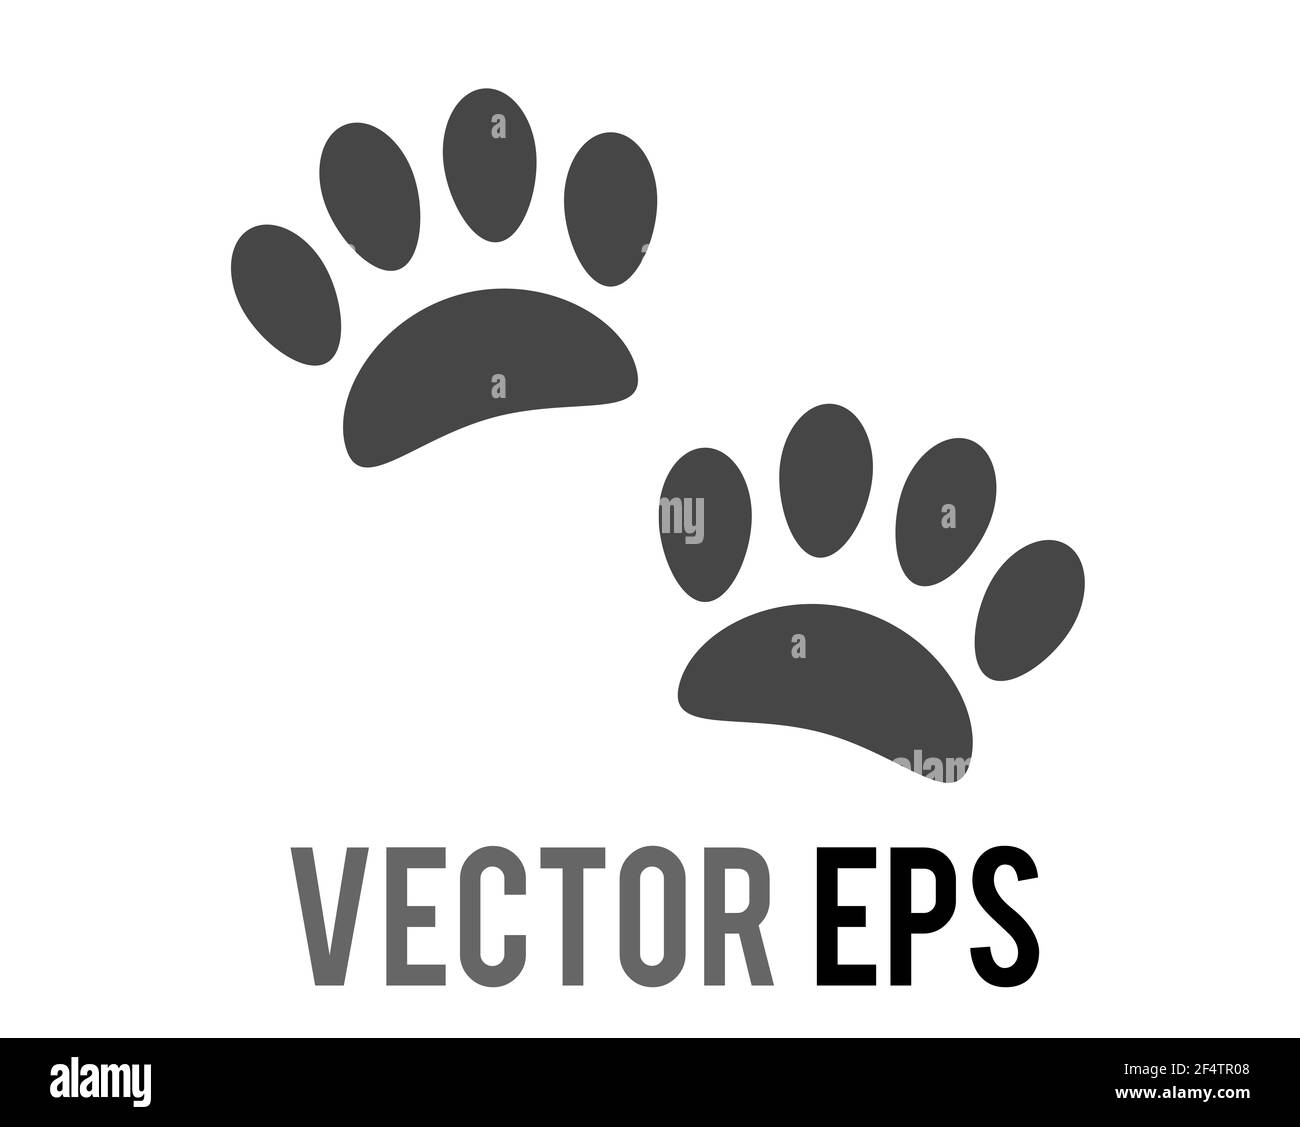 The isolated vector pair of dark paw prints icon, showing four toes and pad, used for various content concerning pet cats and dogs Stock Photo